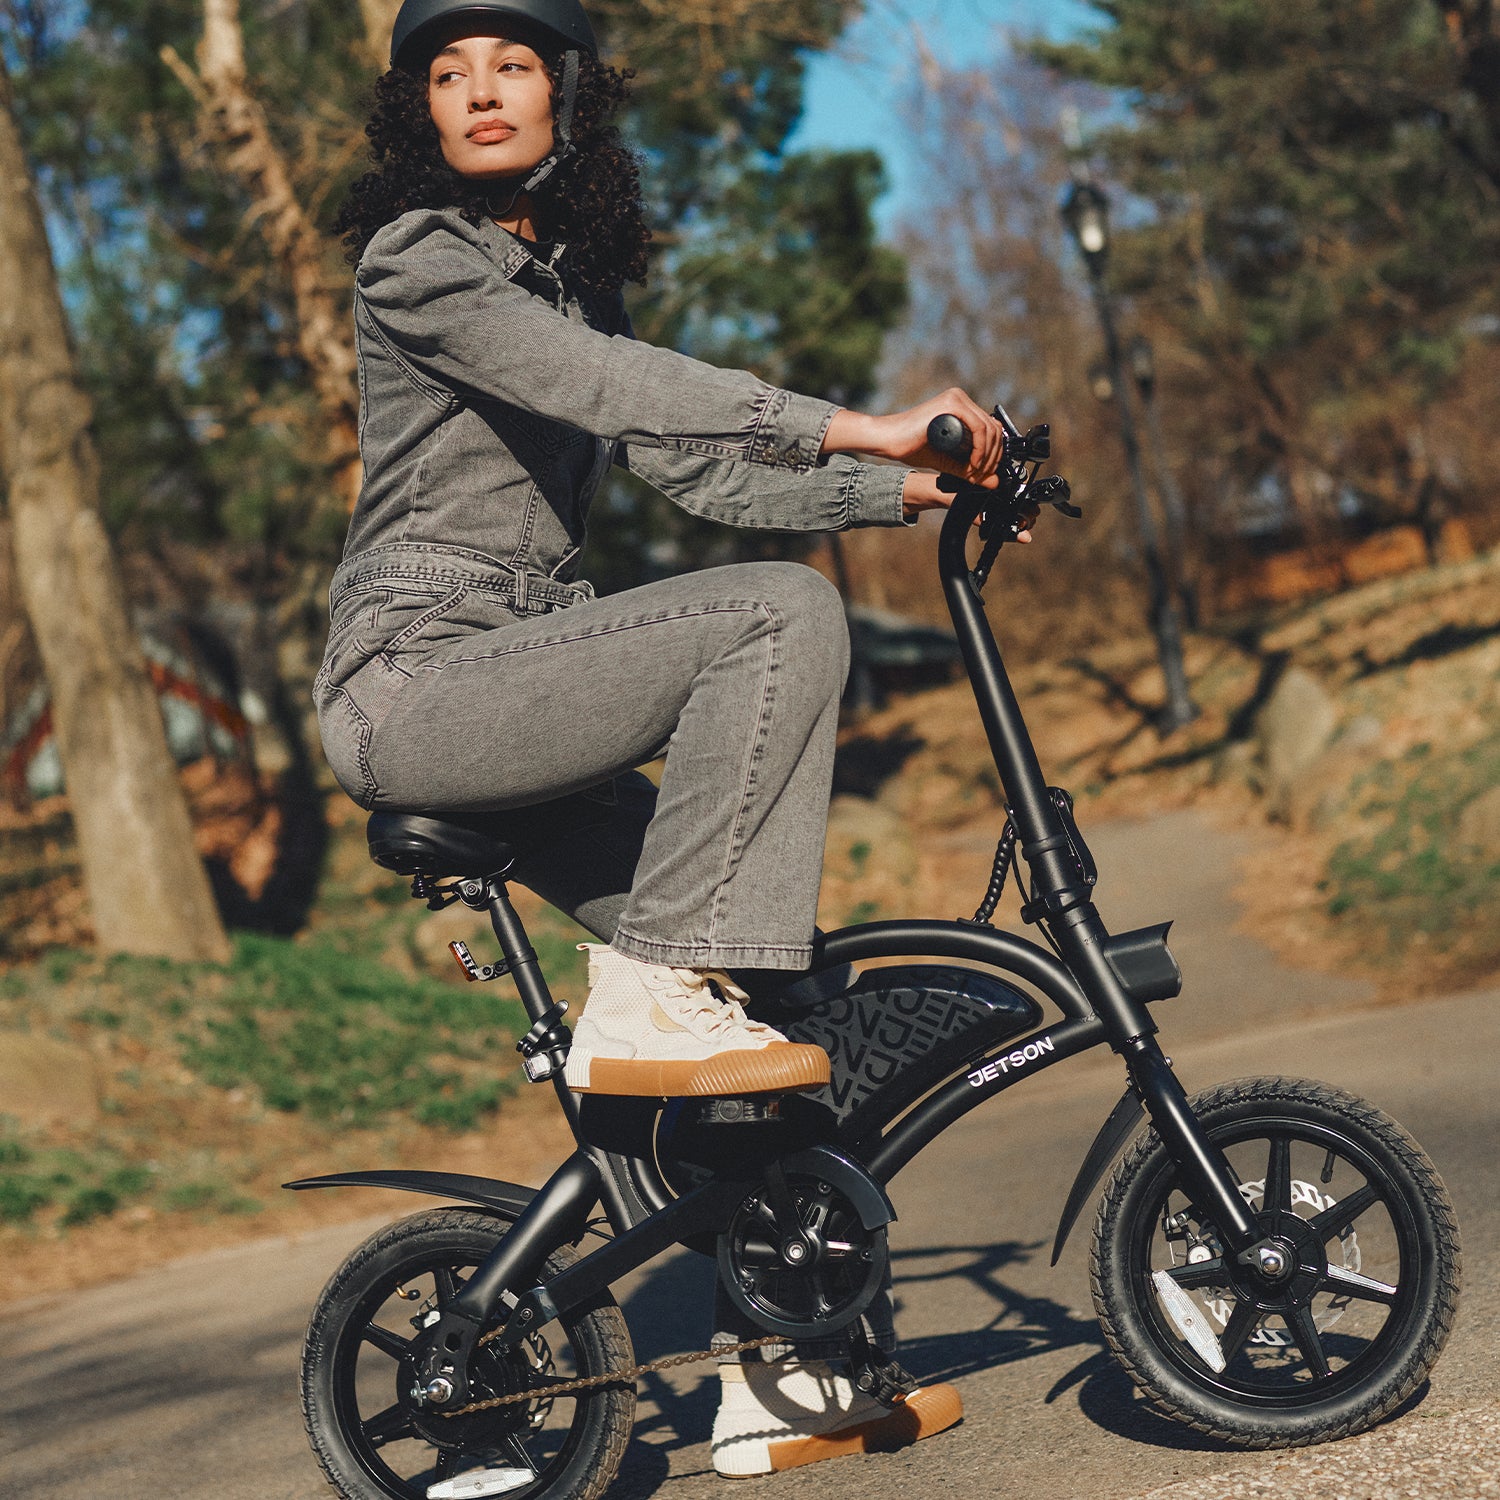 woman riding the Bolt Pro bike in a park